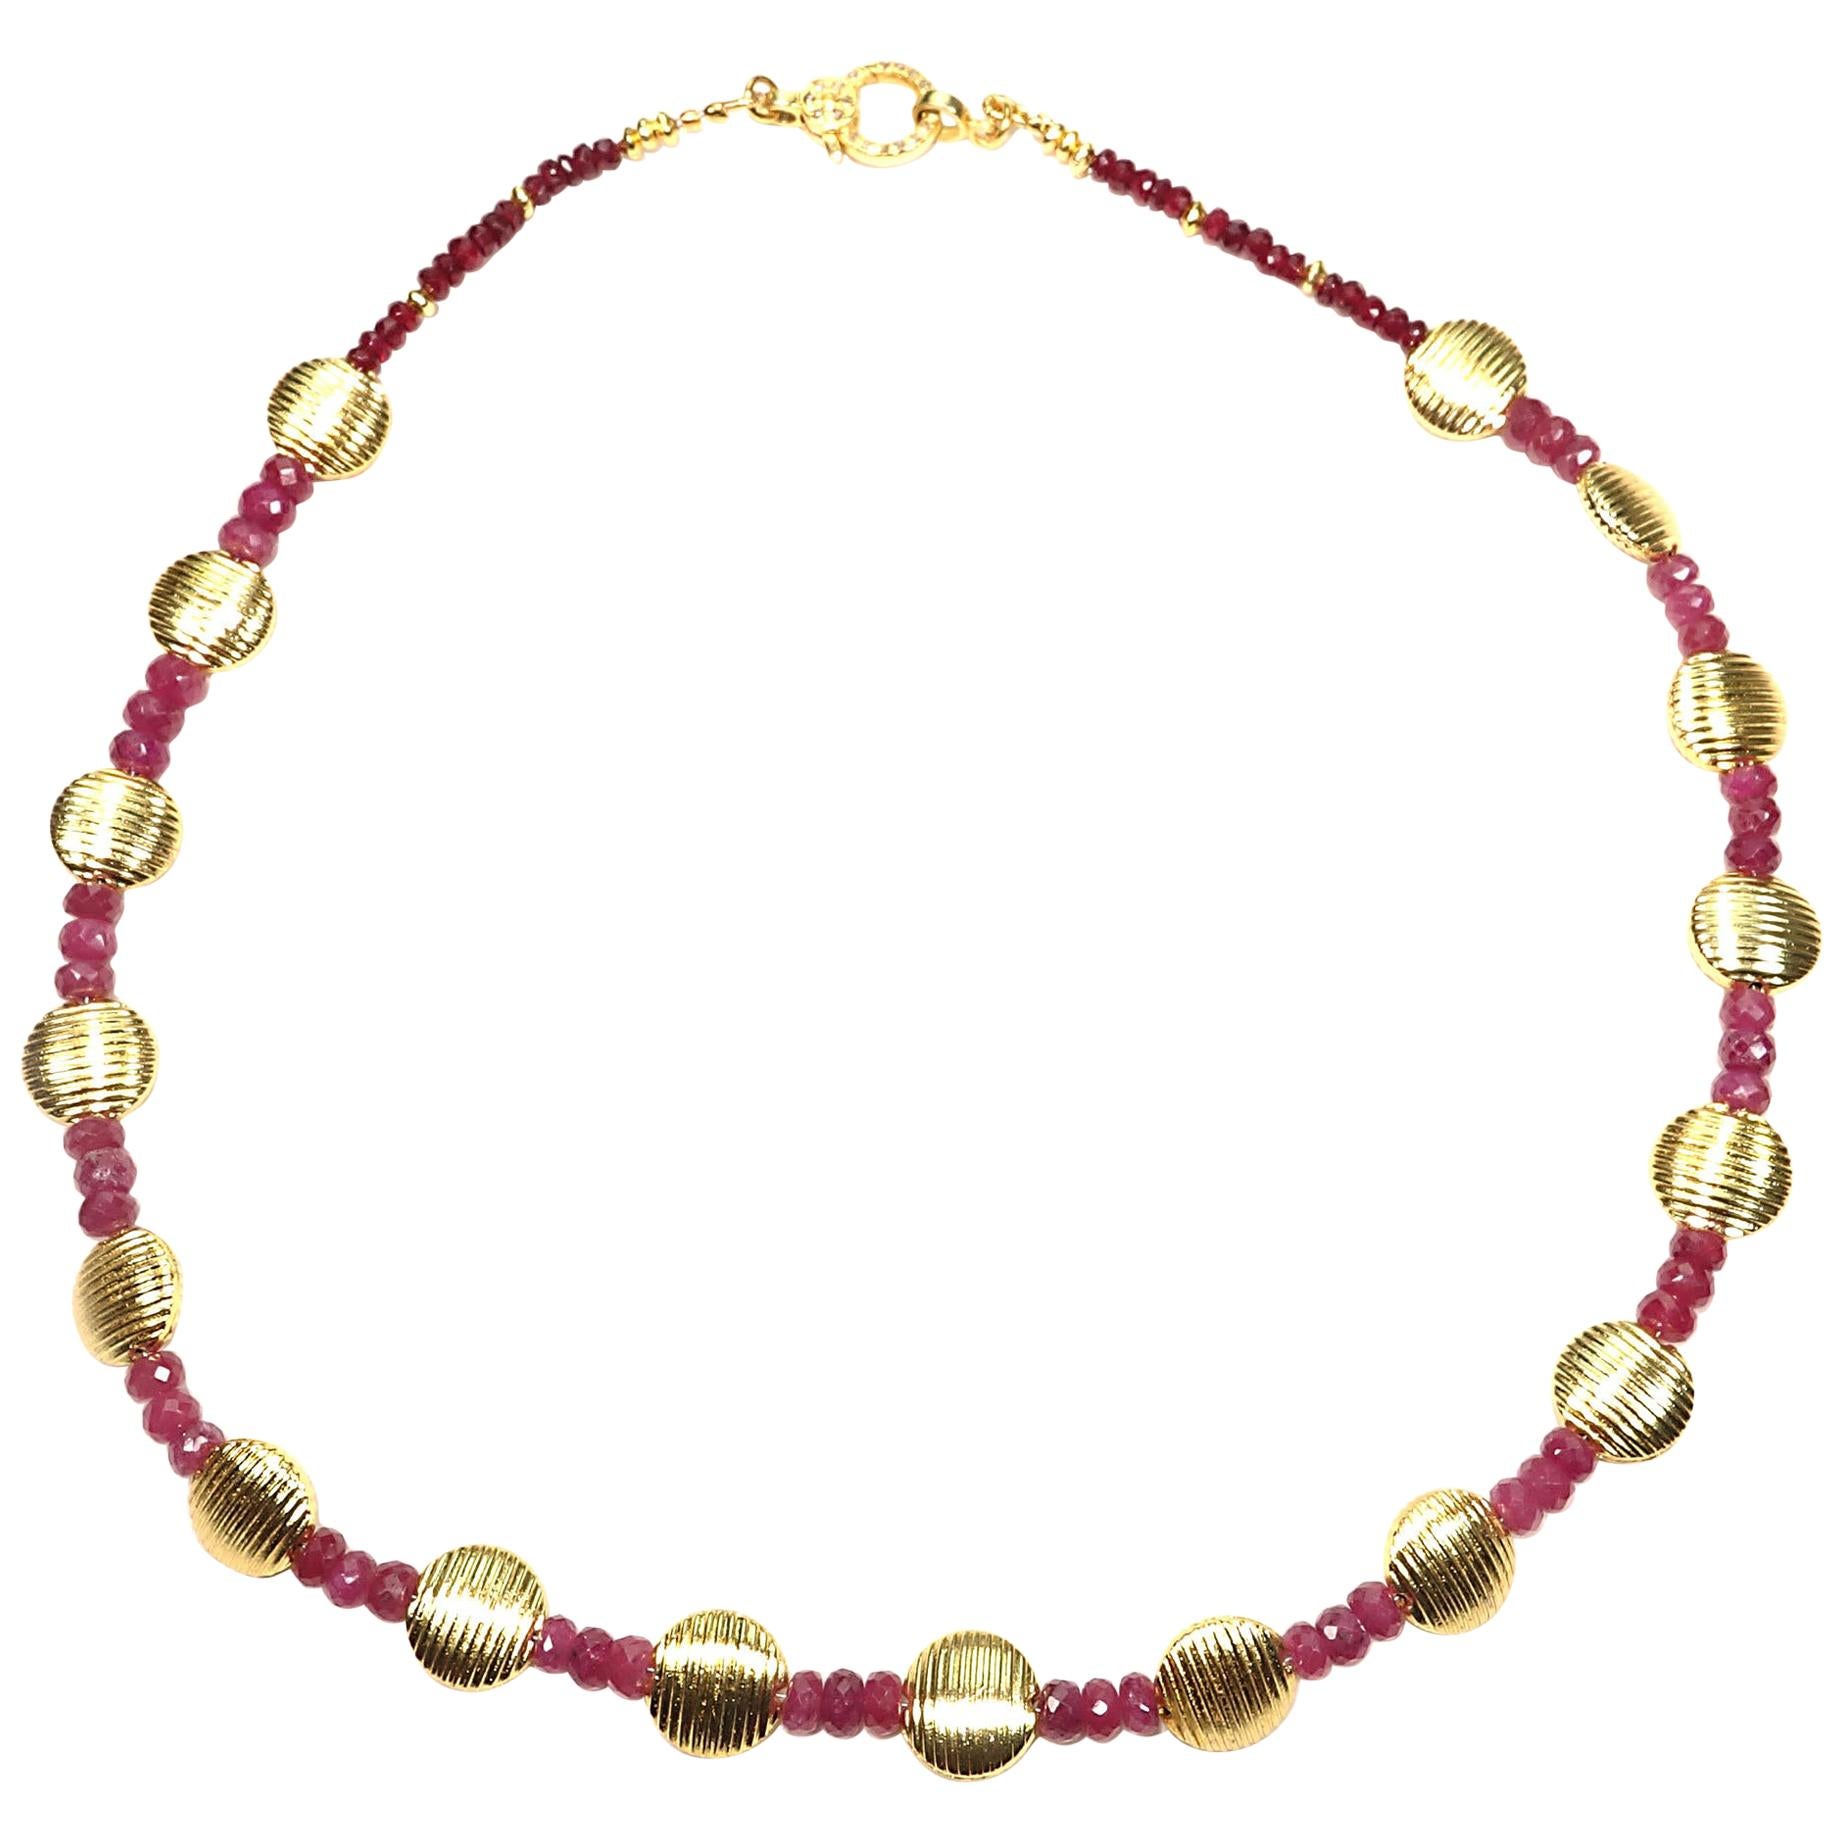 Perfect Valentine's Day Gift! Gemjunky Ruby and Gold Choker Necklace